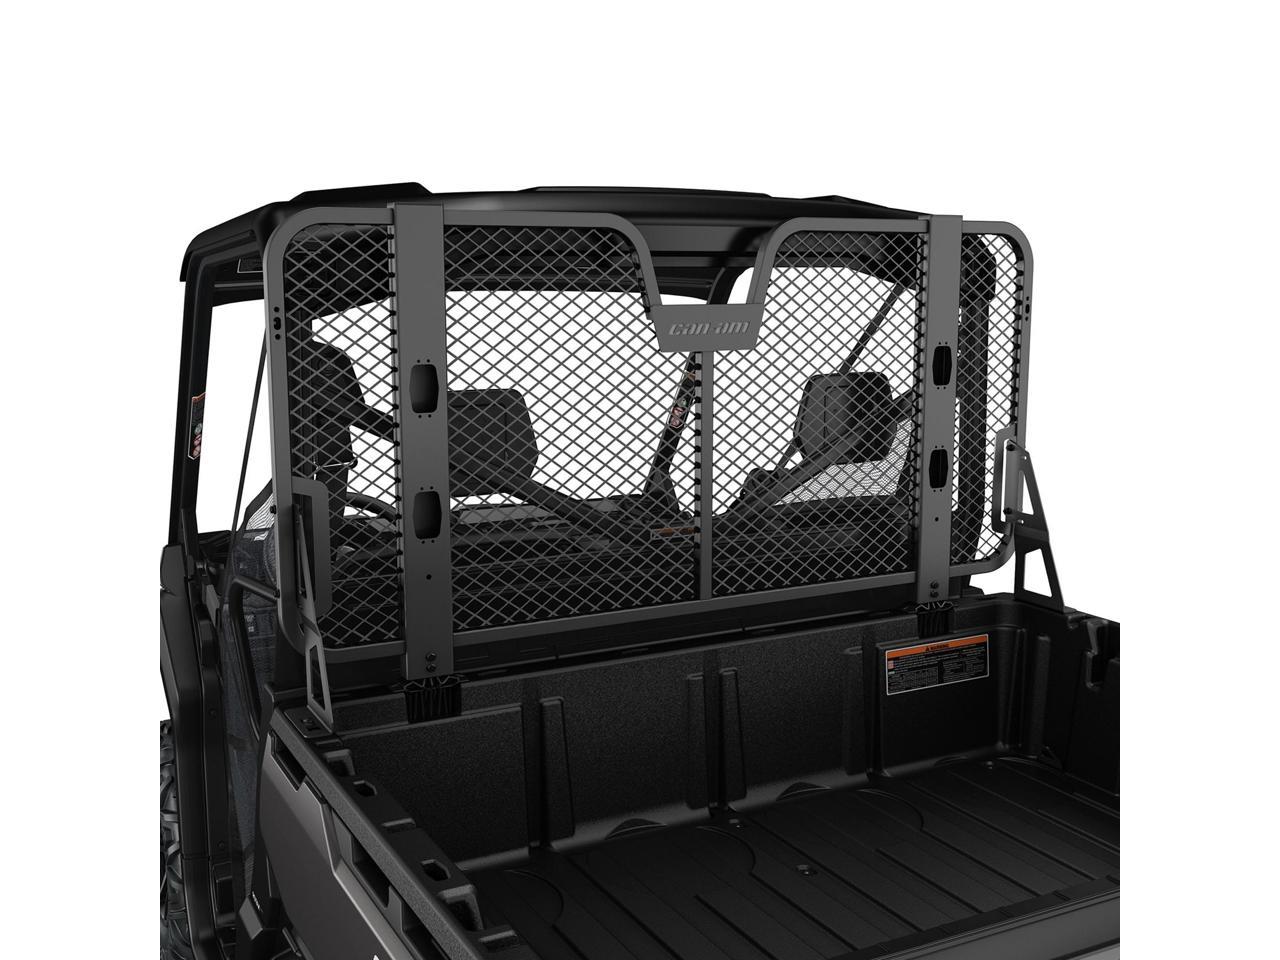 CanAm Deluxe Headache Rack 715002423 for 20162020 CanAm Defender